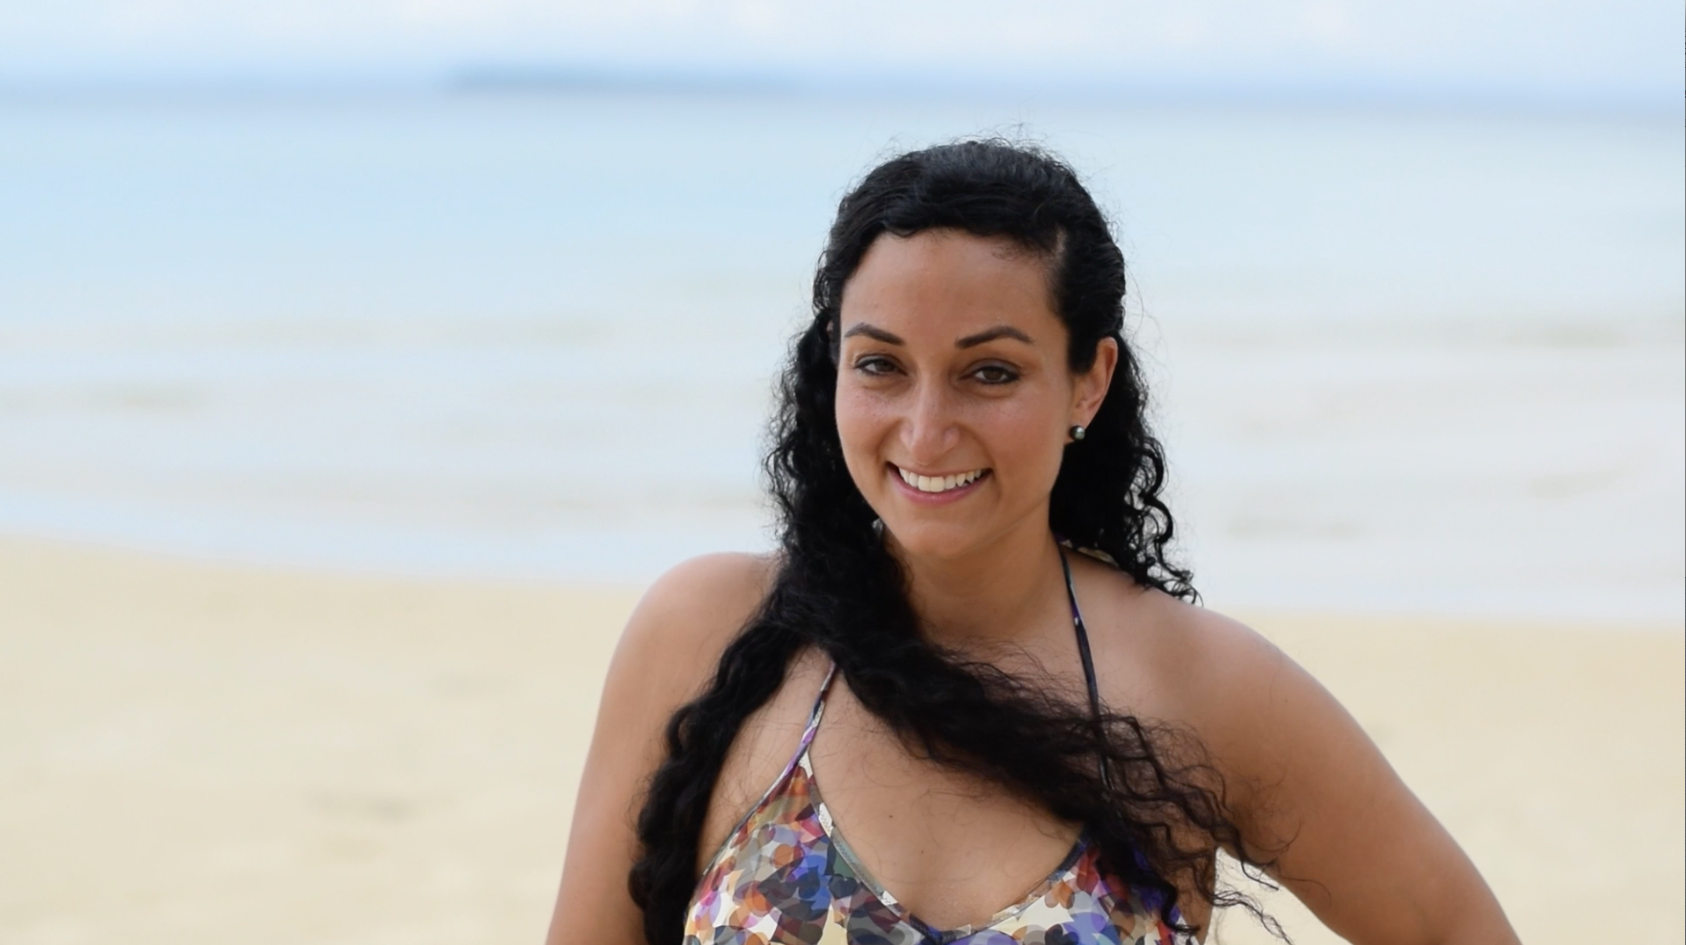 Shirin reflects on her Second Chance stint.